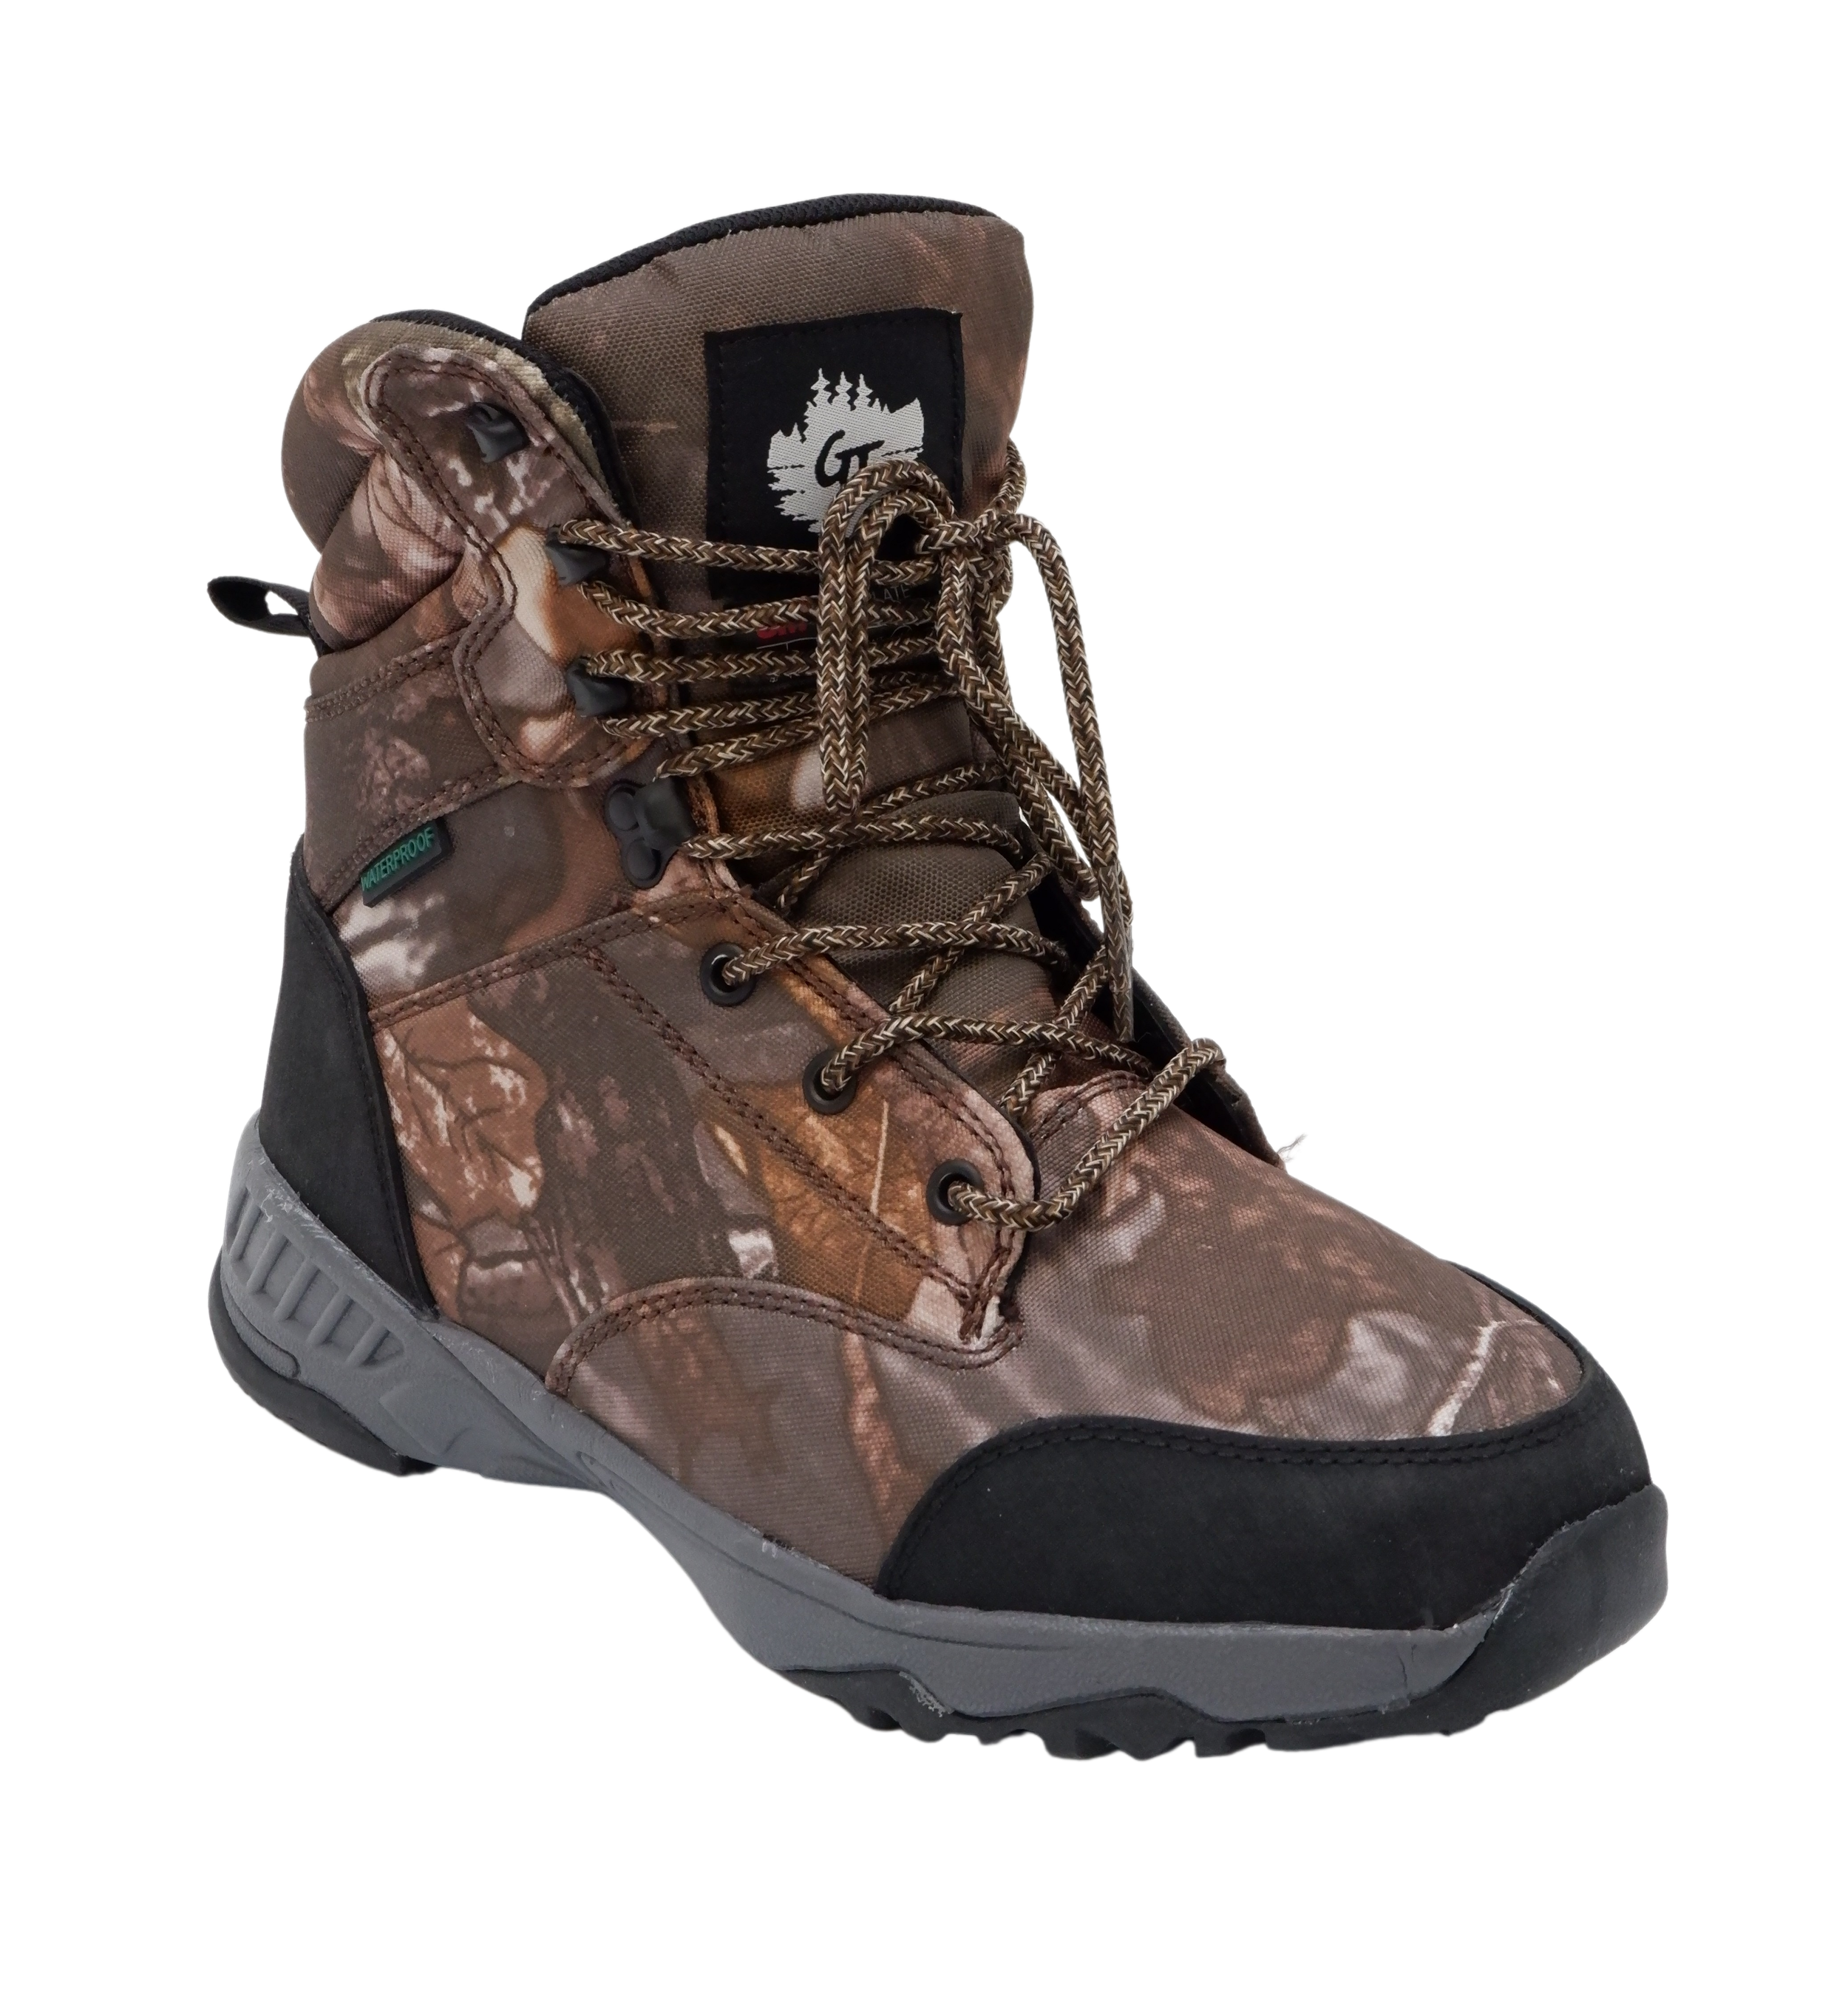 Green Trail Men's Carcajou Waterproof Hunting Boots with Thinsulate Lining | Size 7 - 13